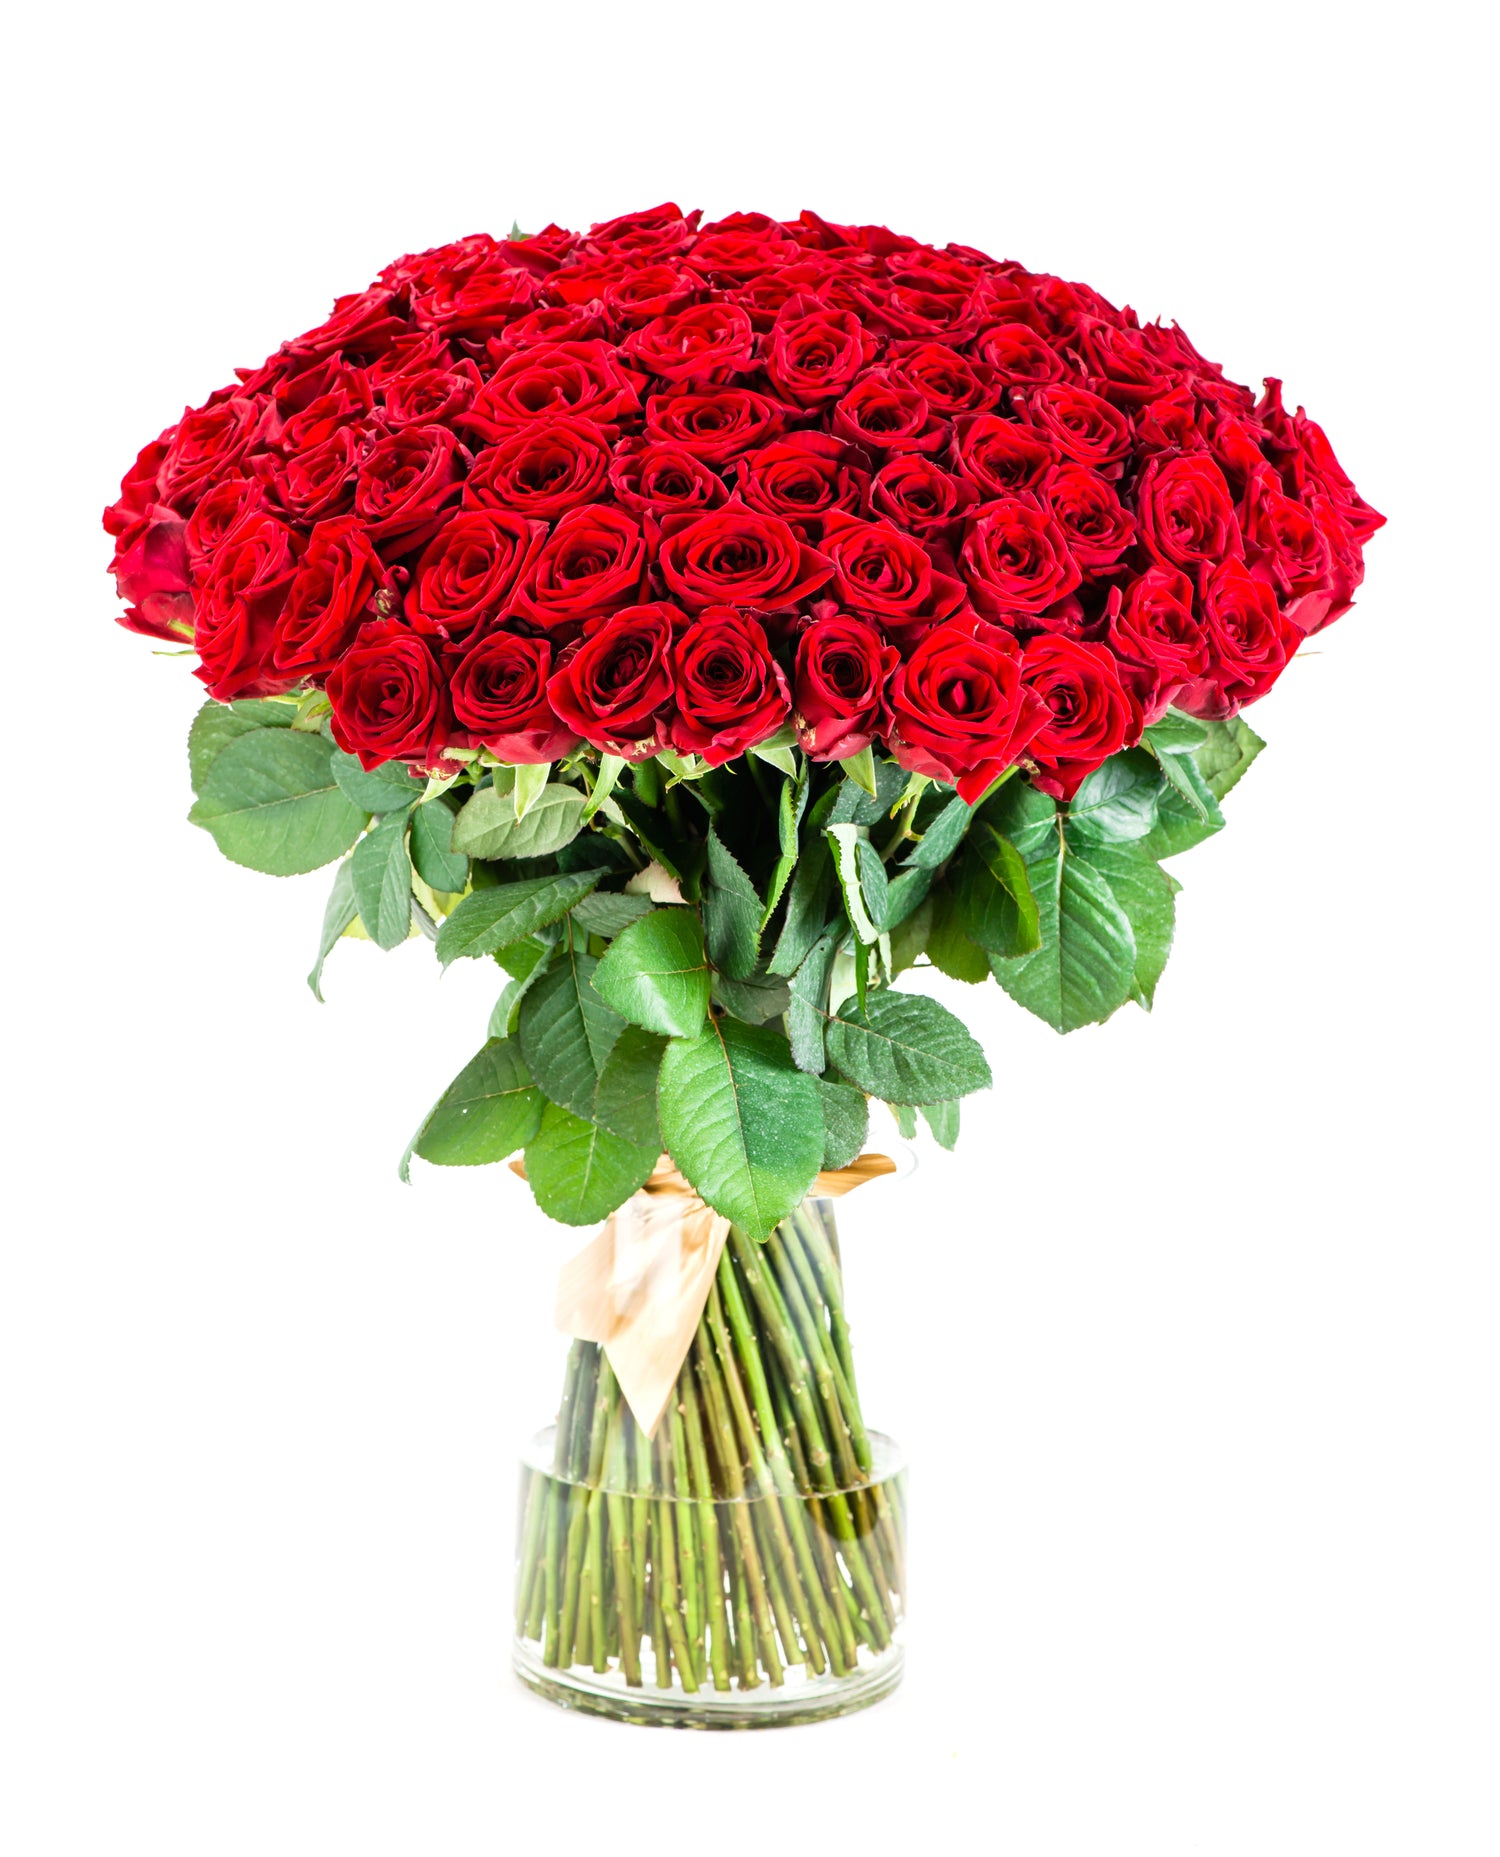 50 Premium Red Roses - Flower Shop 50 red Roses bouquet